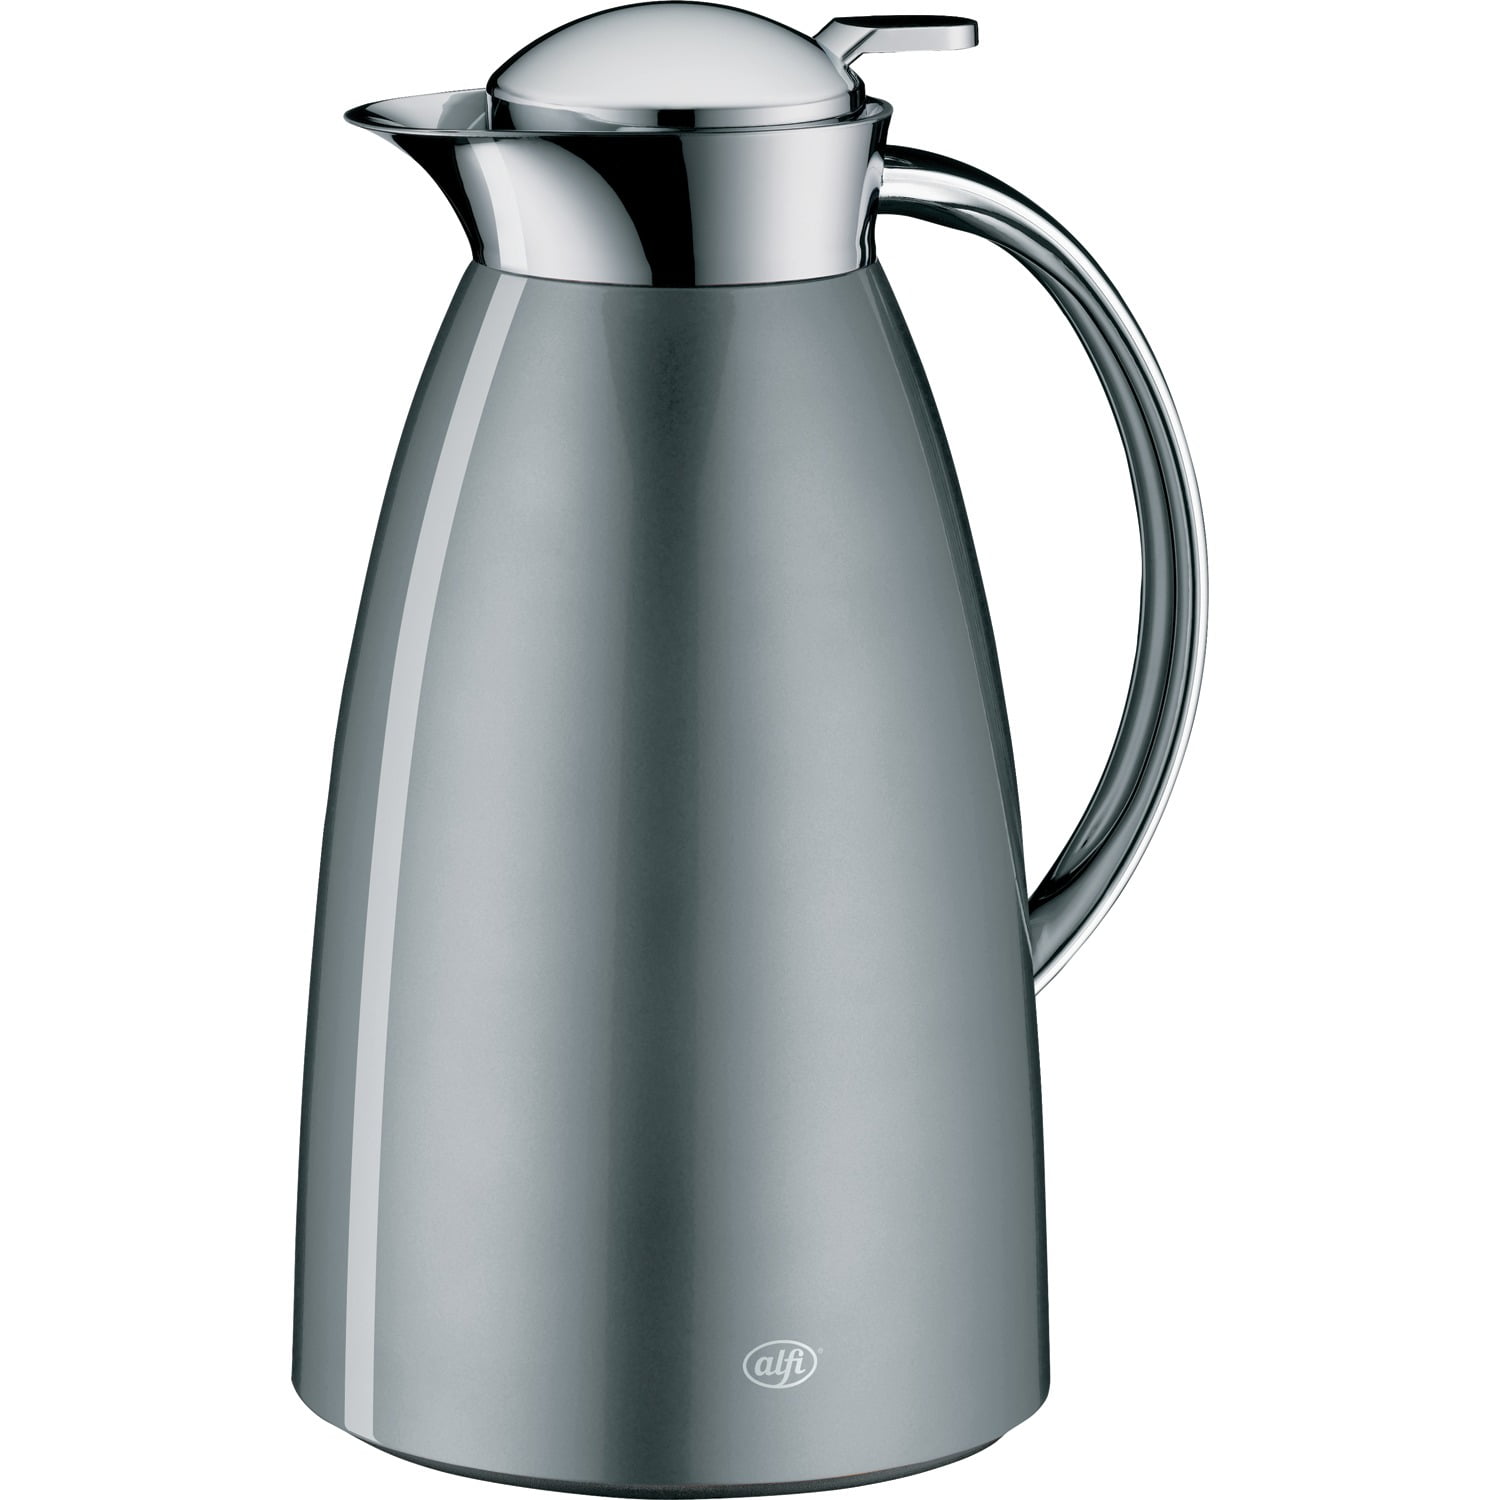 Carafe 1-Liter Glass alfi AG1900GY2 Vacuum-Insulated (Lacquered Space Gray) Gusto Metal